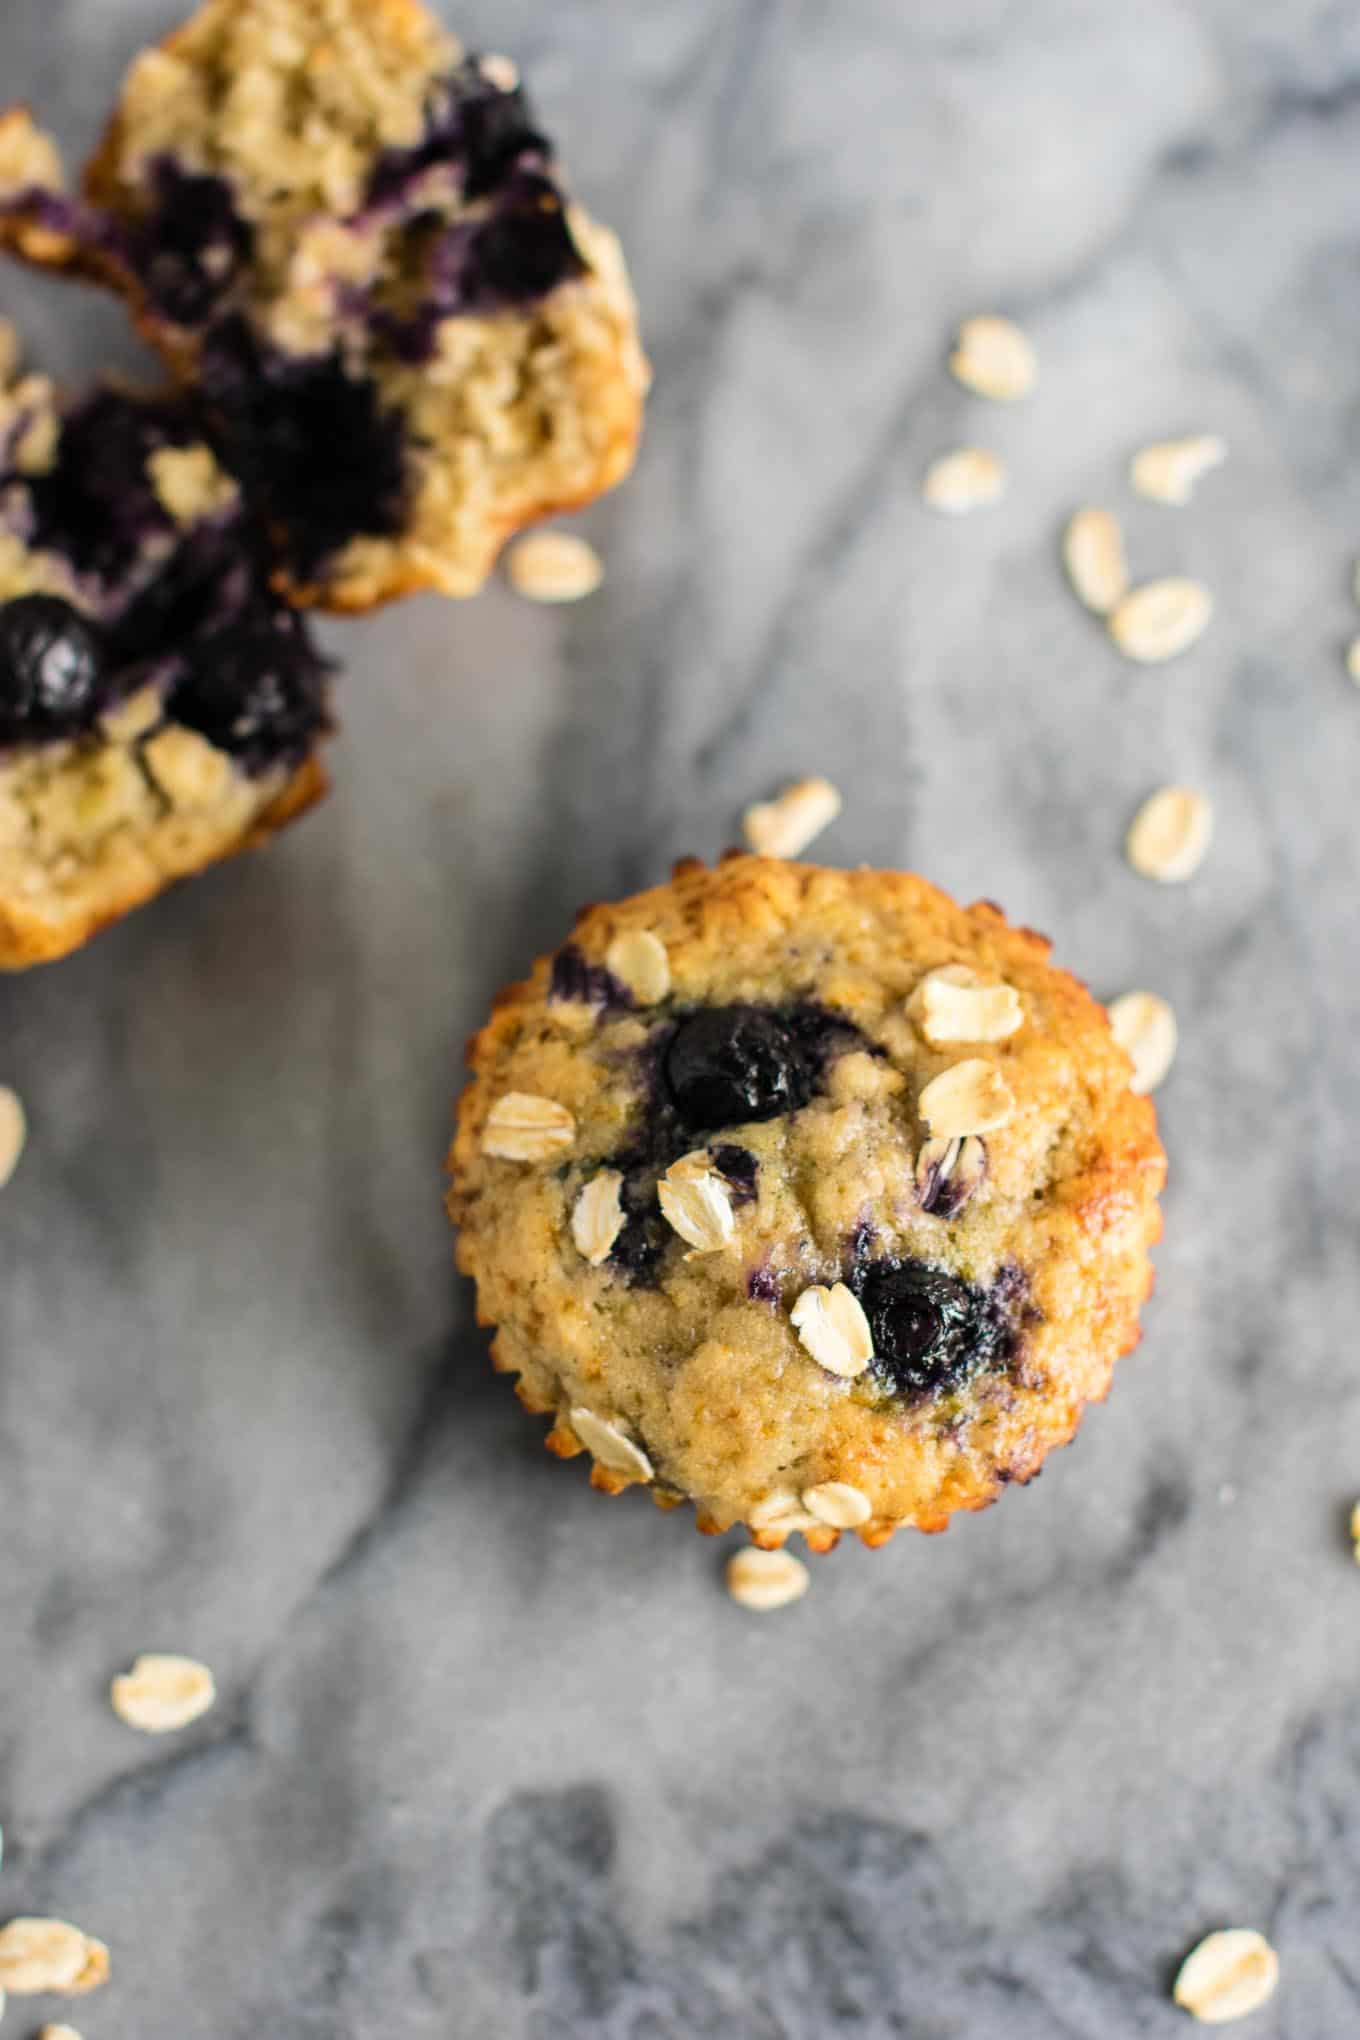 Healthy Blueberry Muffins with greek yogurt and coconut oil. Melt in your mouth crazy delicious! A protein packed healthy breakfast on the go. #healthyblueberrymuffins #blueberrymuffins #breakfast #greekyogurt #healthybreakfast